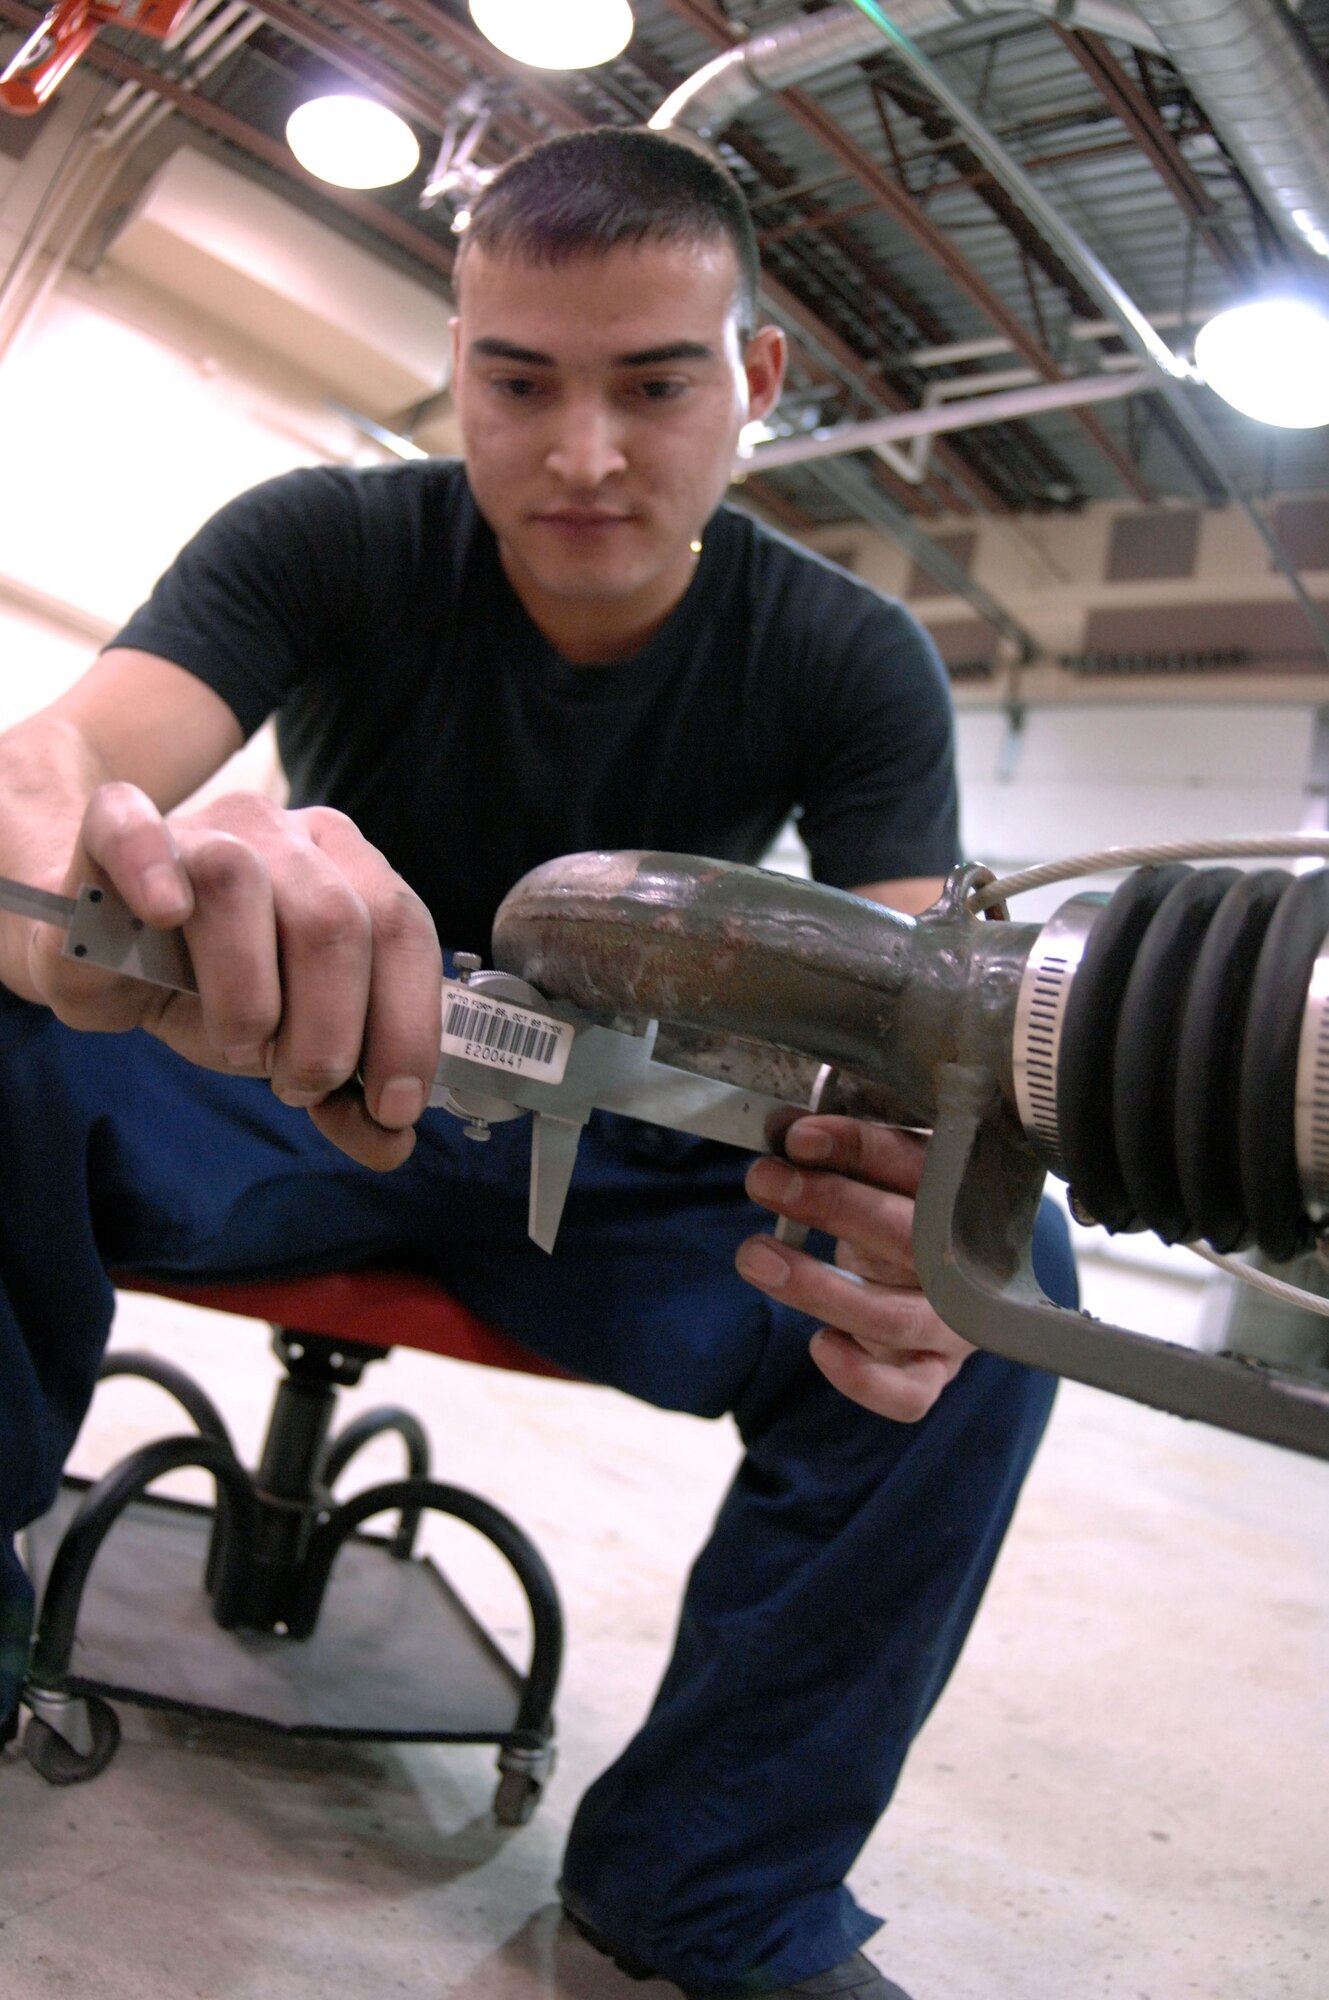 EIELSON AIR FORCE BASE, Alaska -- Airman Jaime Valle, 354th Maintenance Squadron, 354th Fighter Wing, checks the lunette for wear and tear during a 365 inspection on an MHU-141/M Munitions Handling Trailer here on 13 December. The lunette wears down over time due to excessive use. The inspection is a yearly operational and maintenance check on the trailer which can be configured to carry different munition types. 
(U.S. Air Force Photo by Staff Sgt Joshua Strang)